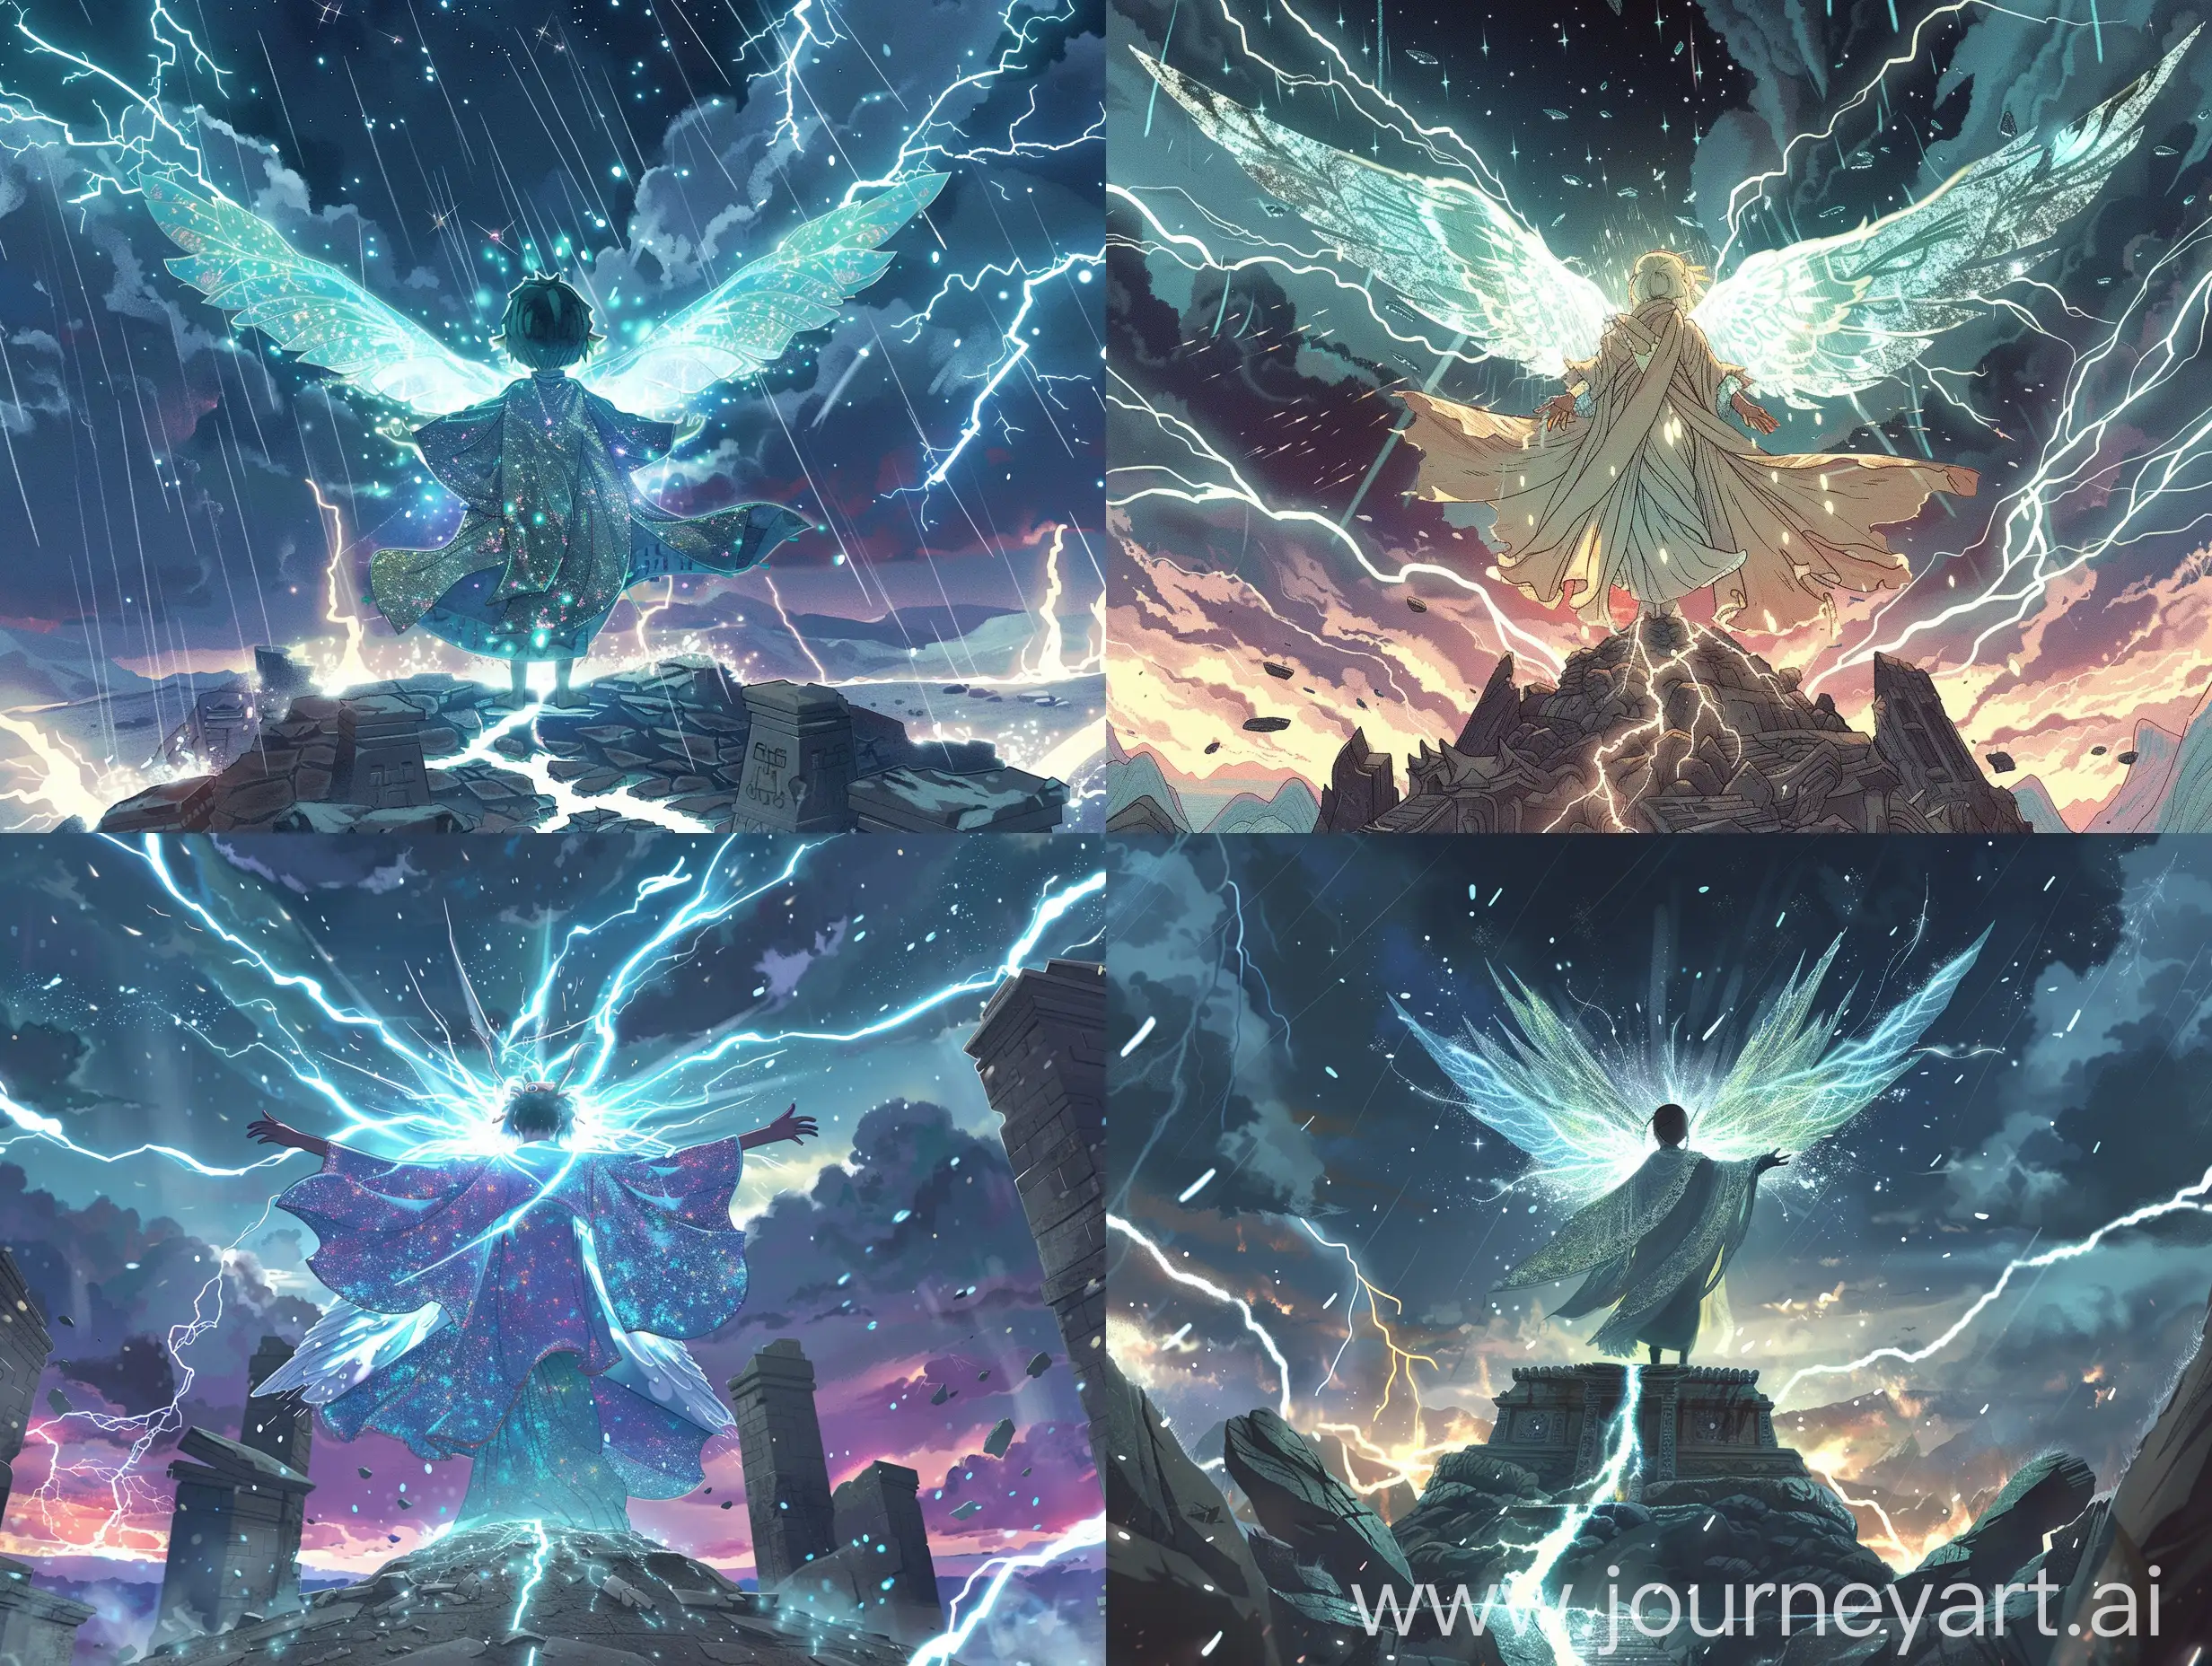 Imagine a scene set at the peak of an ancient, crumbling mountaintop temple under a tumultuous, star-filled sky. At the center of this scene, a divine child, cloaked in a radiant, shimmering robe, stands with arms outstretched, undergoing a dramatic transformation. Energy swirls around them, manifesting as brilliant, ethereal wings that unfurl majestically from their back. Their eyes glow with an otherworldly light, casting illuminating beams that cut through the surrounding darkness. The ground beneath them cracks, revealing veins of glowing, mystical energy that echo the turmoil in the sky above. Lightning forks over the horizon, illuminating the scene in flashes, as if the very elements are bearing witness to the child's ascension. The intensity of the moment is captured in every detail, from the fluttering of the robe in the supernatural wind to the determined expression of power and serenity on the child's face. This scene is designed in a 2D anime style, emphasizing dramatic lighting, exaggerated expressions, and dynamic poses typical of a monumental journey's climax.